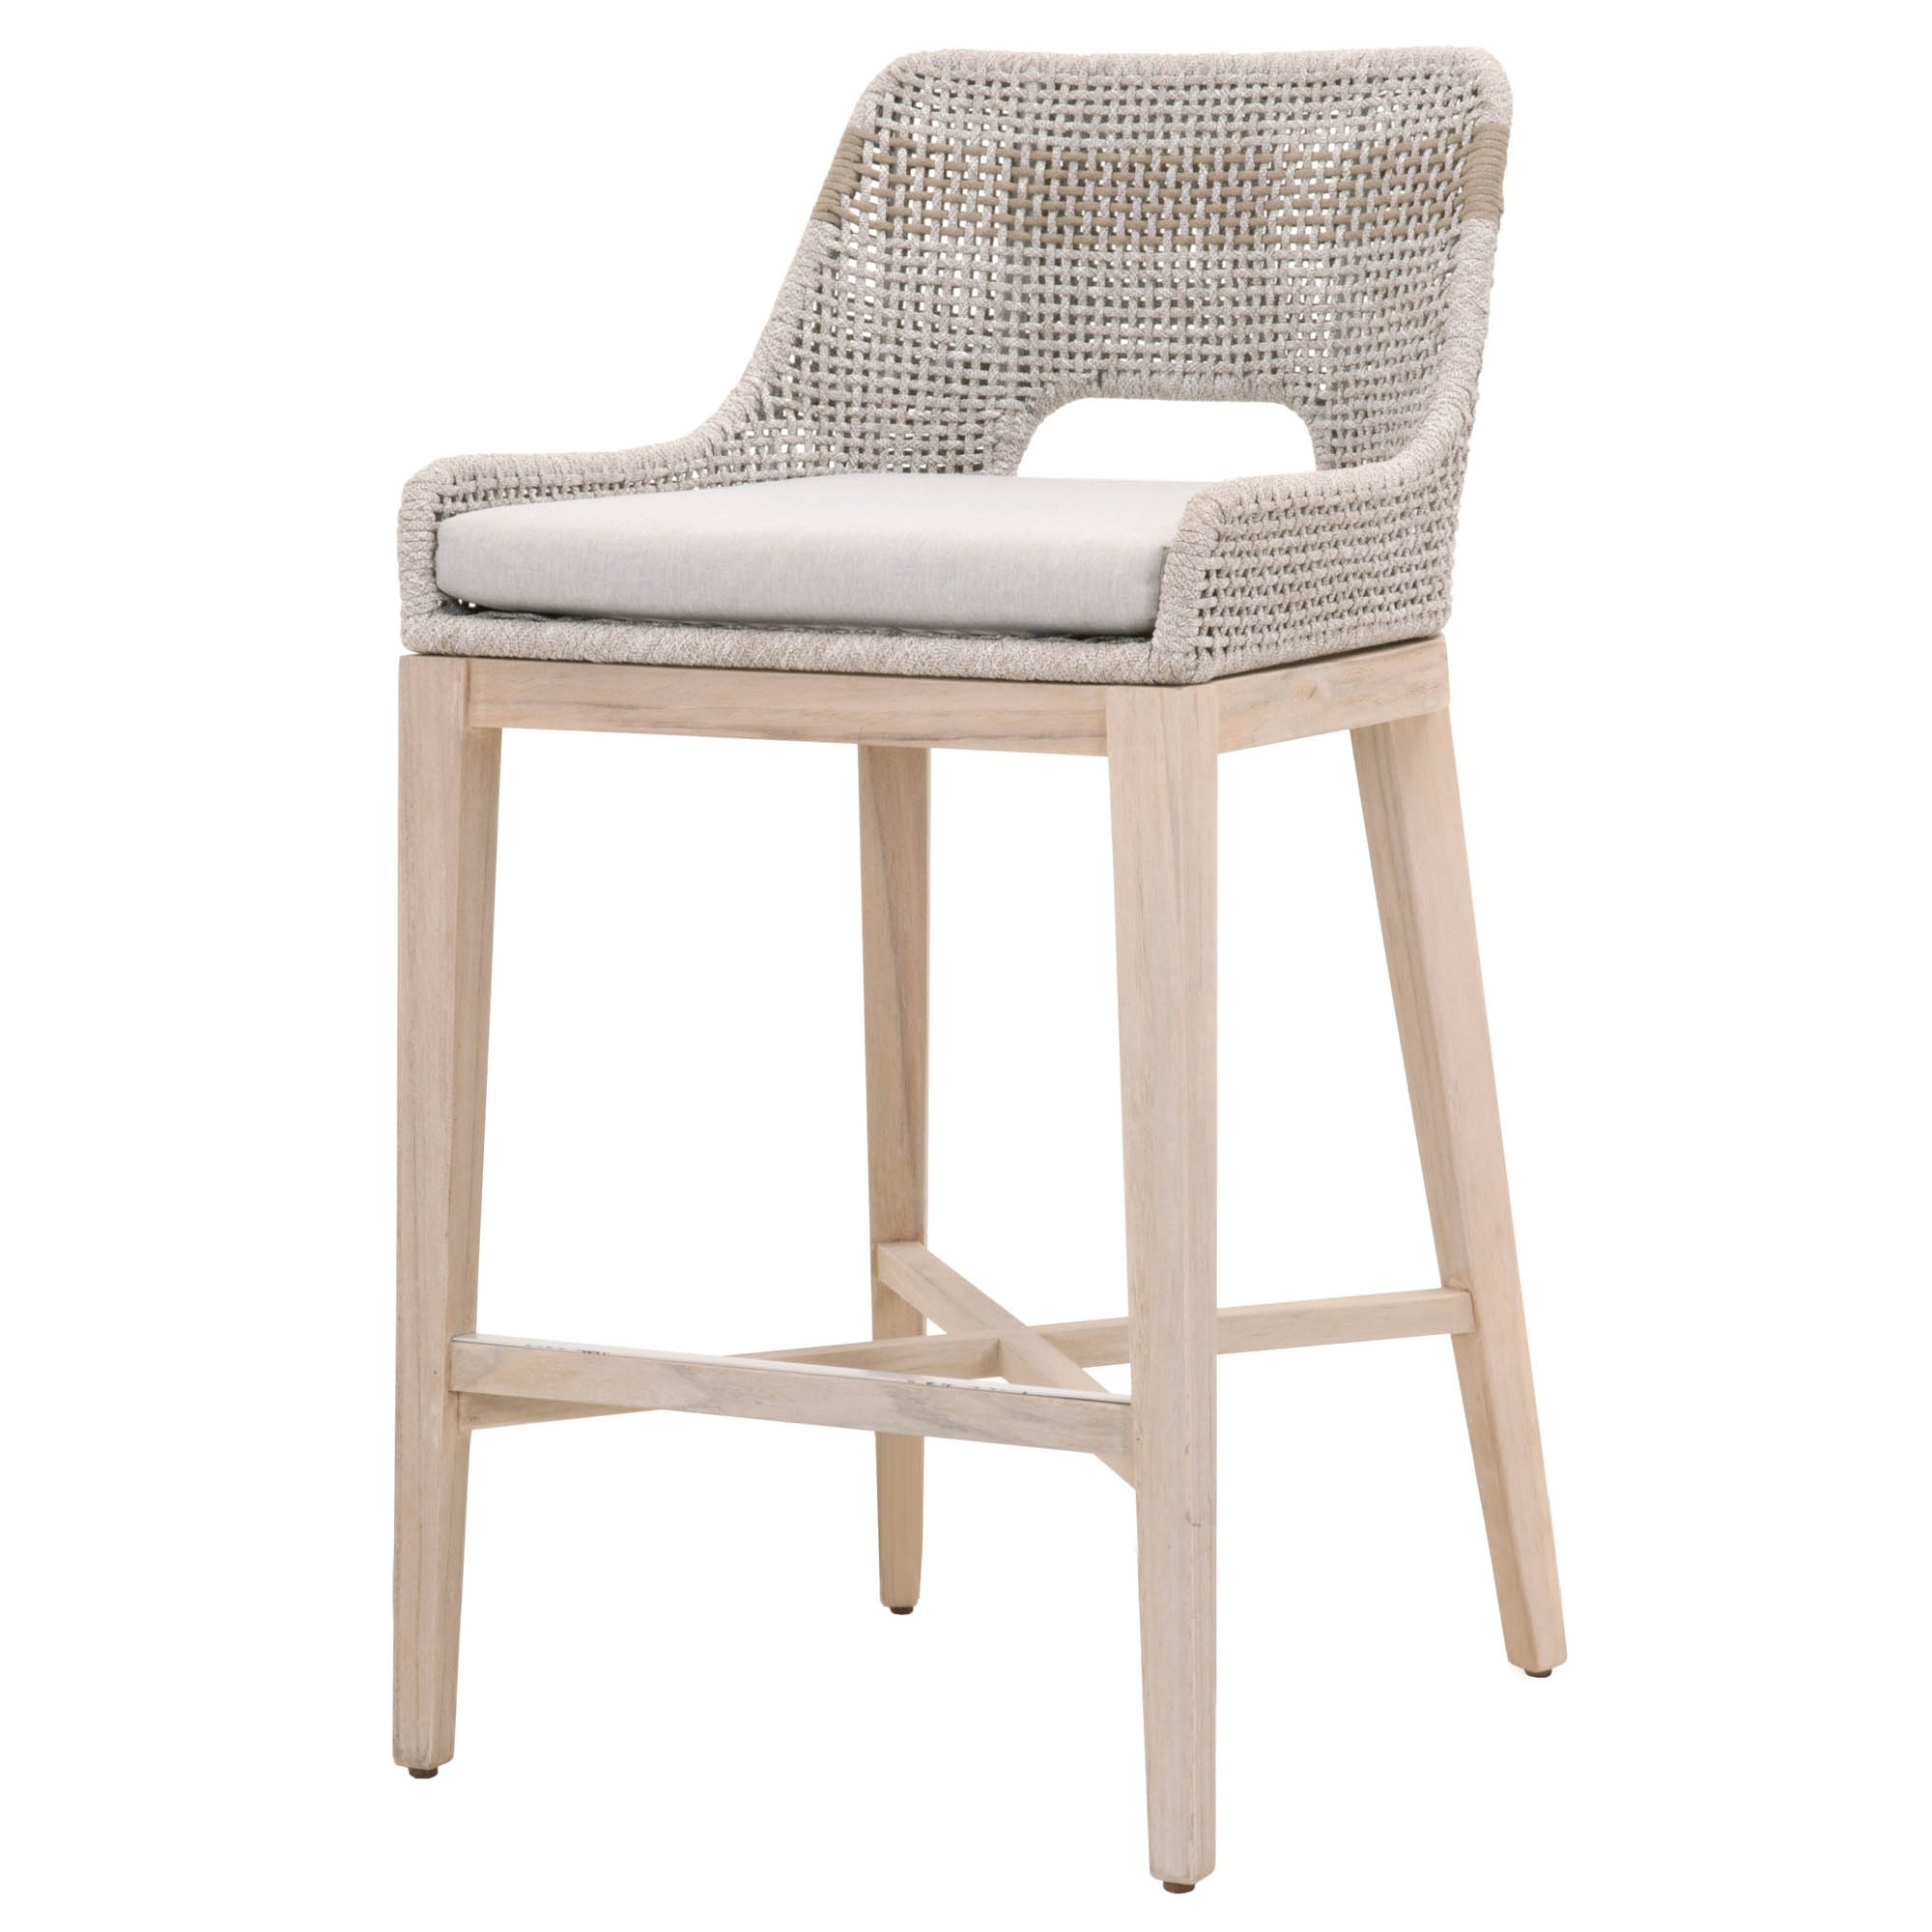 Tapestry Outdoor Barstool, Gray - Image 1